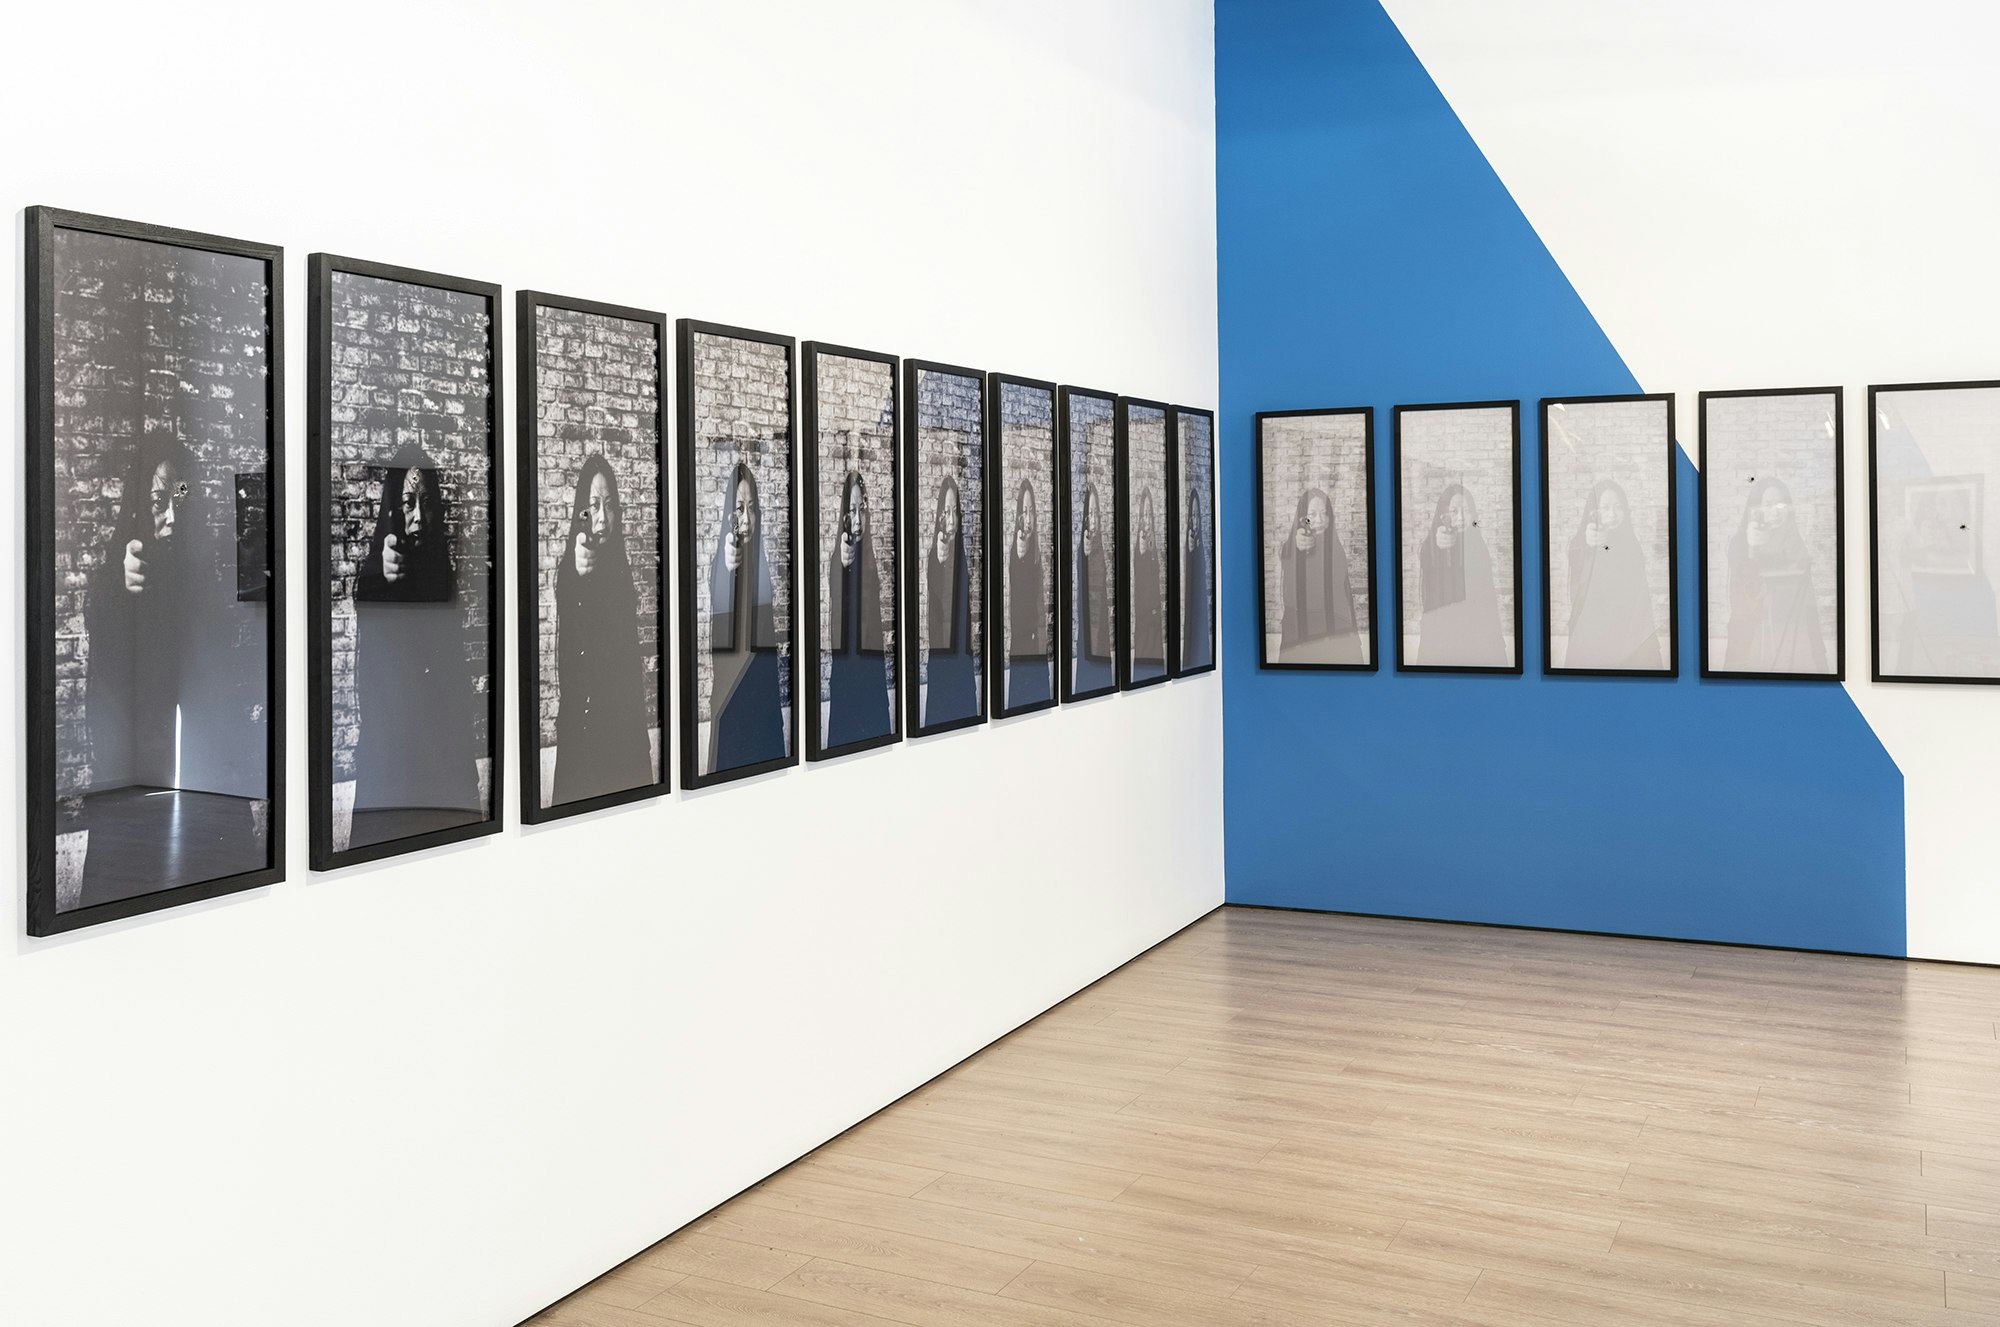 Fifteen framed black and white prints depicting an East Asian woman with long black hair, torso up, standing against a brick wall and pointing a pistol at the camera